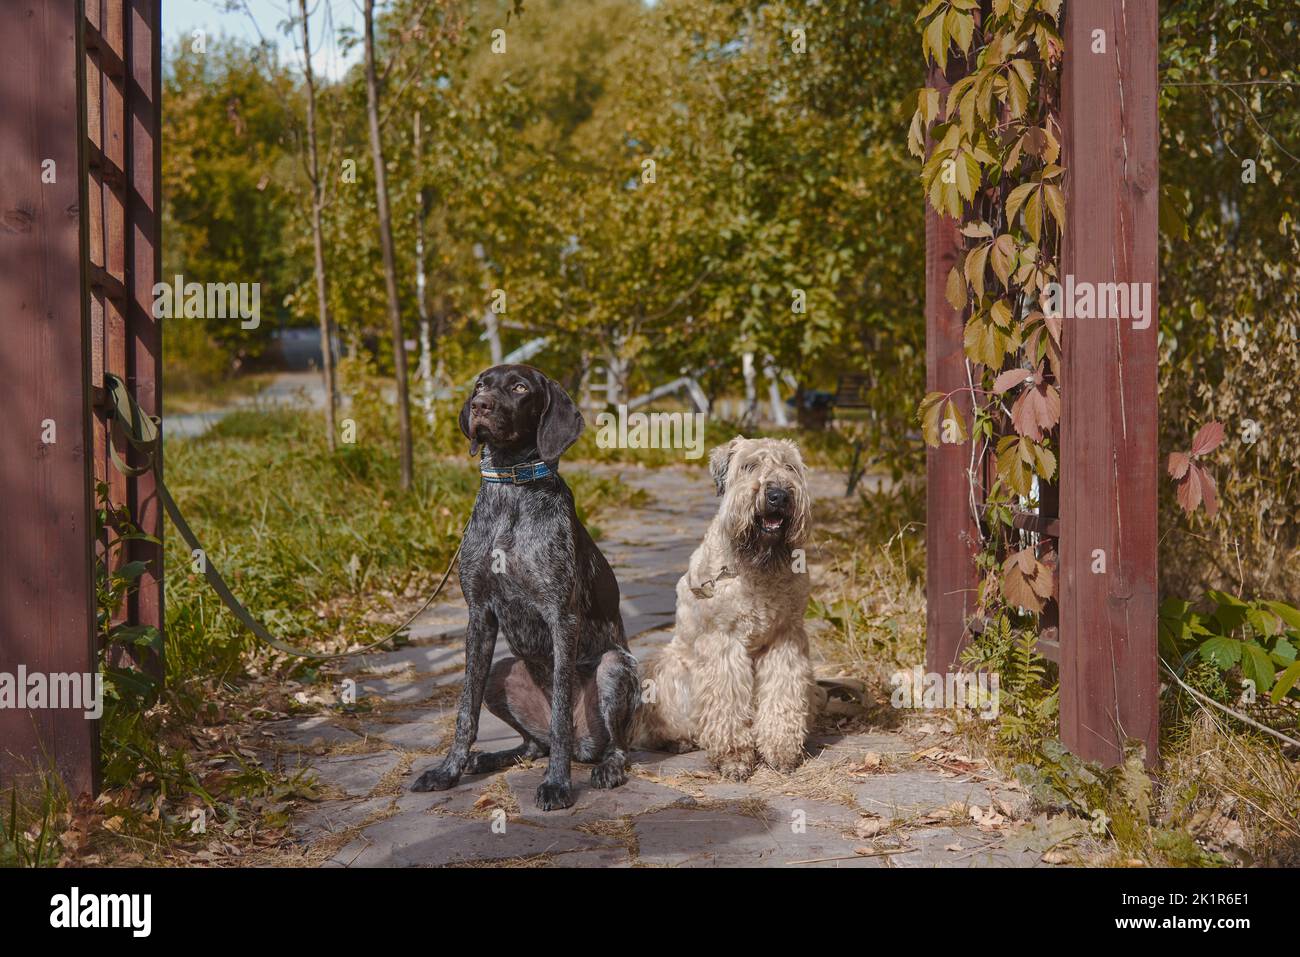 Two dogs, a German shorthaired pointer and an Irish wheaten soft-coated terrier, sit side by side on the path in the autumn park. Stock Photo